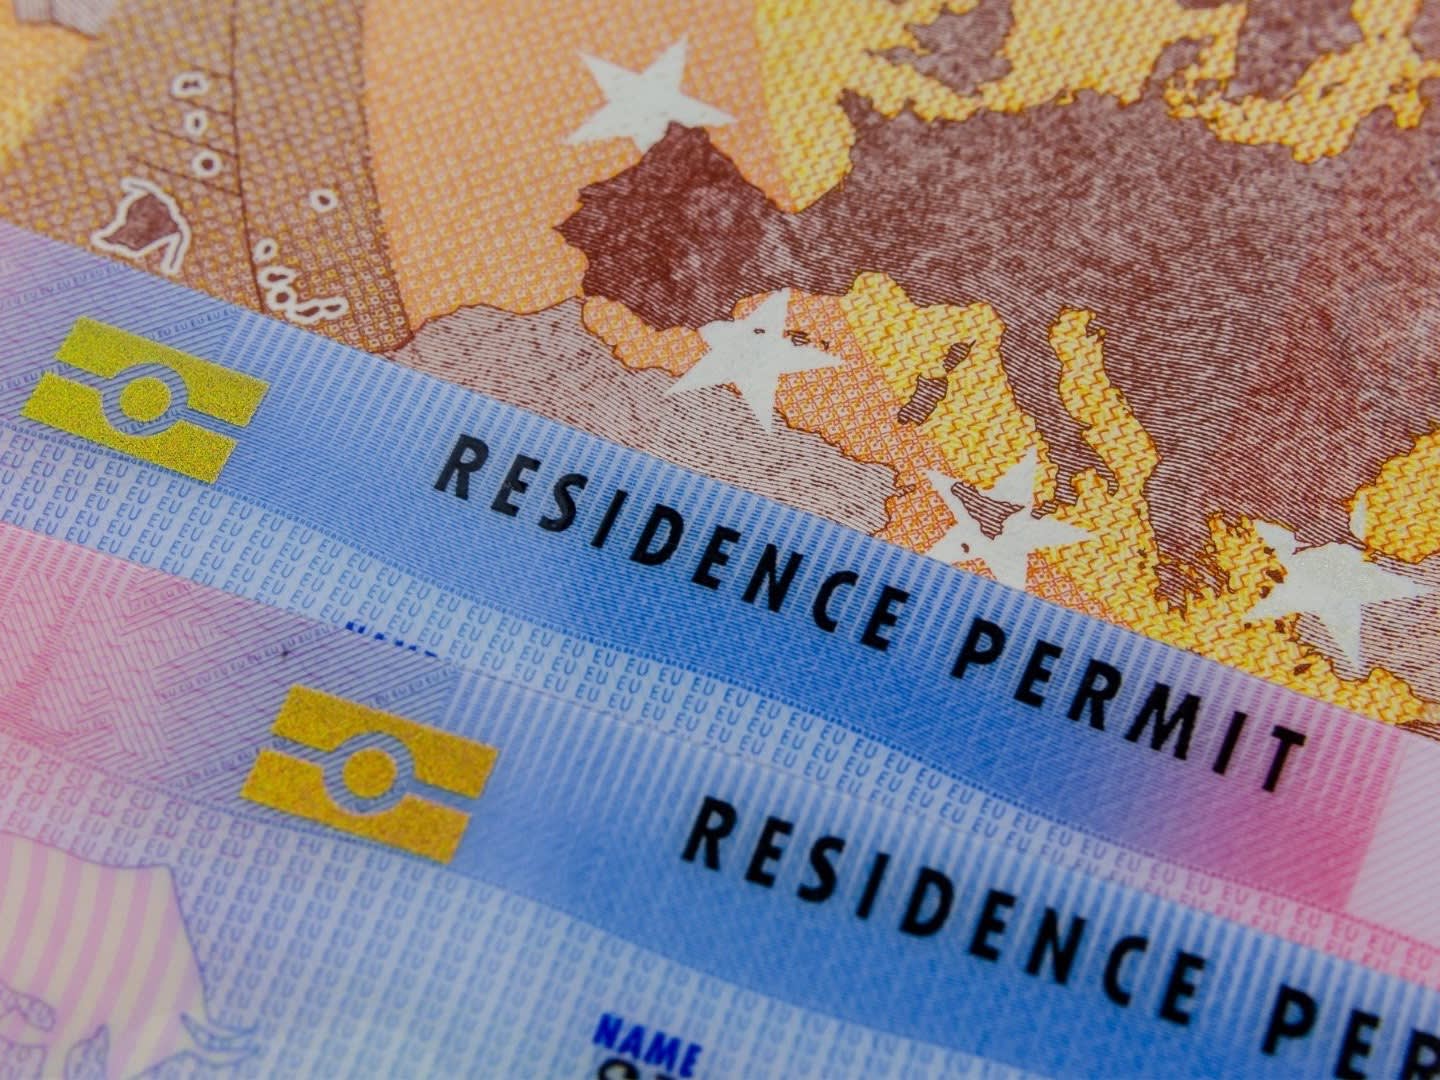 residence permit card on a euro bill